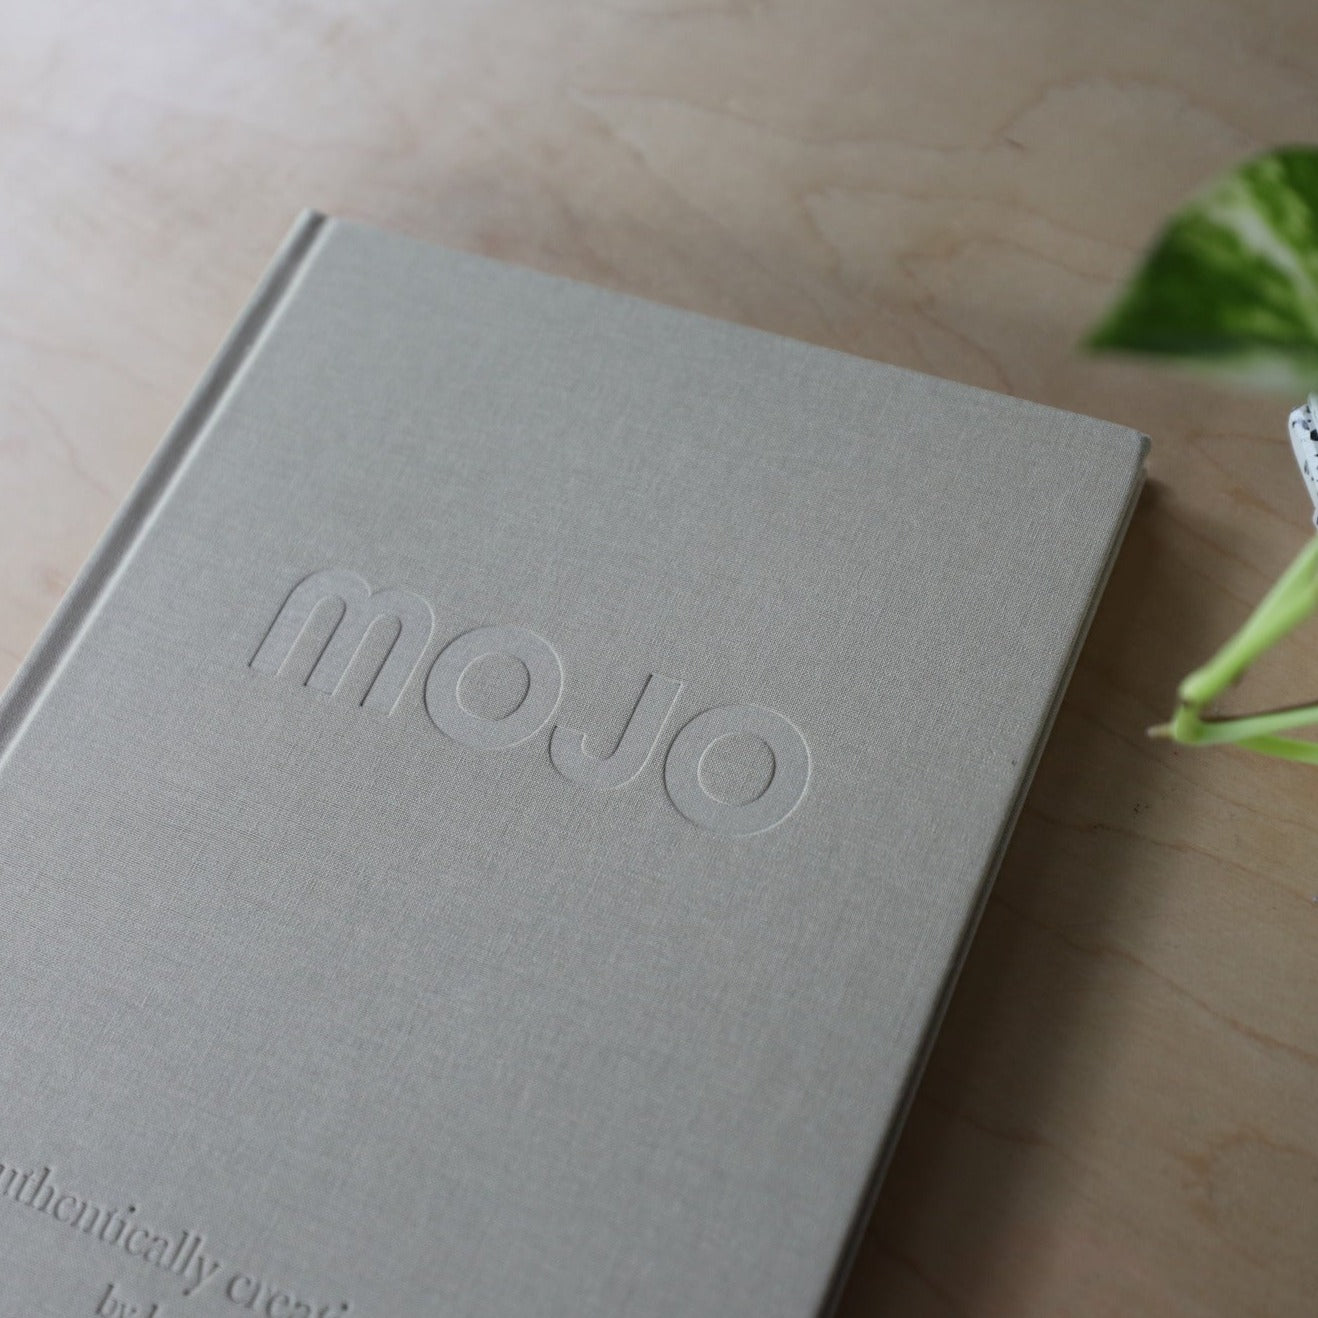 Photo of front linen cover of the Mojo book on top of a light grained wood table and a green leaf just in the corner foreground.